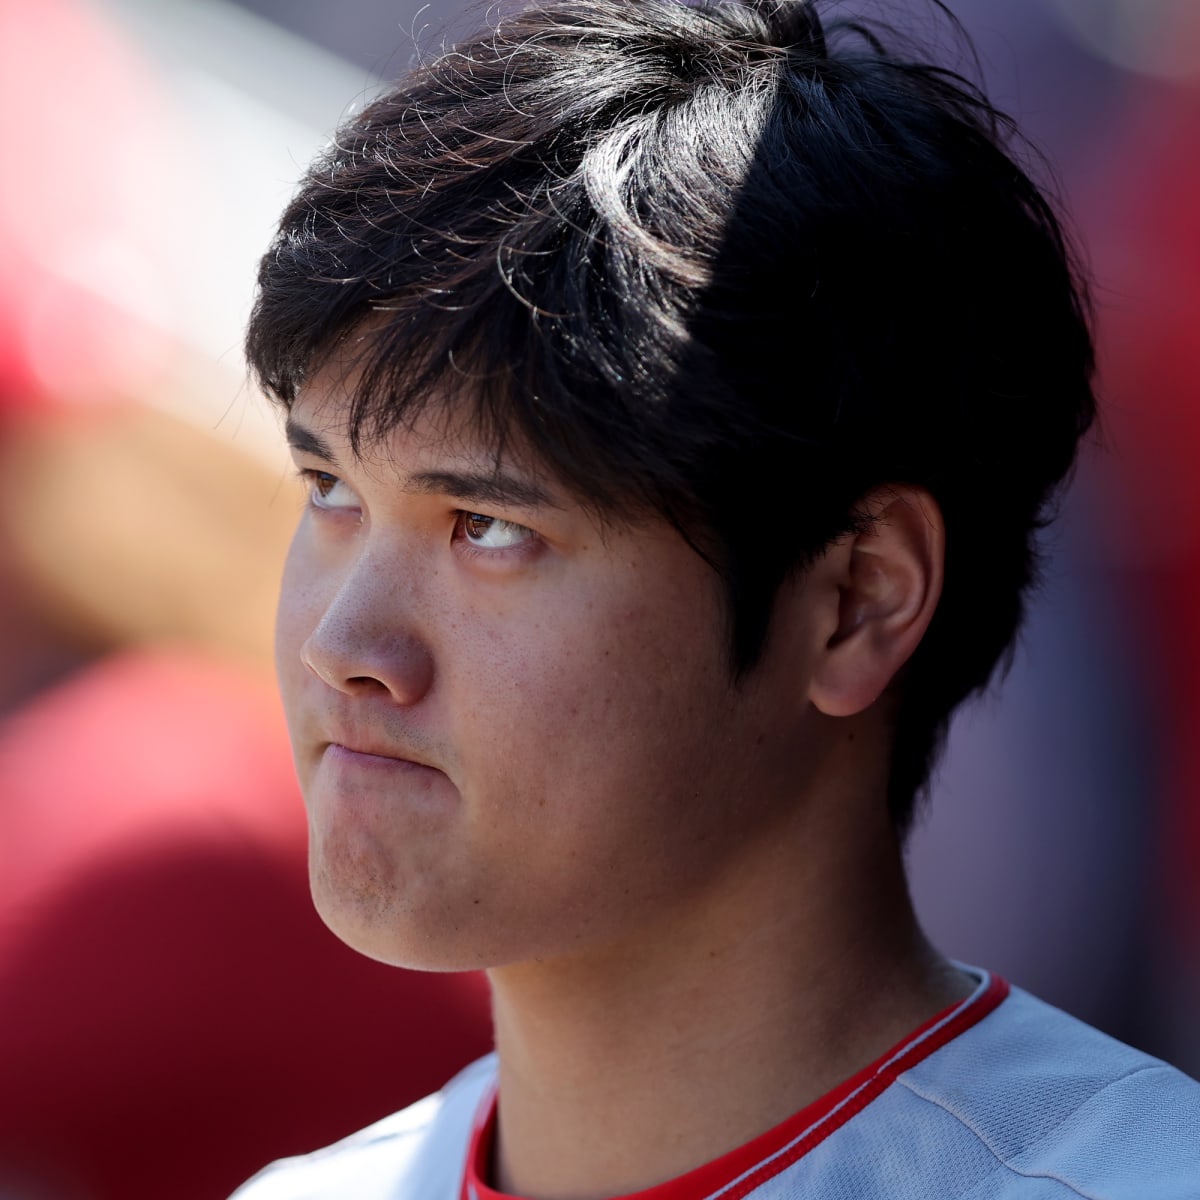 MLB Insider Believes Shohei Ohtani Will Sign With Dodgers